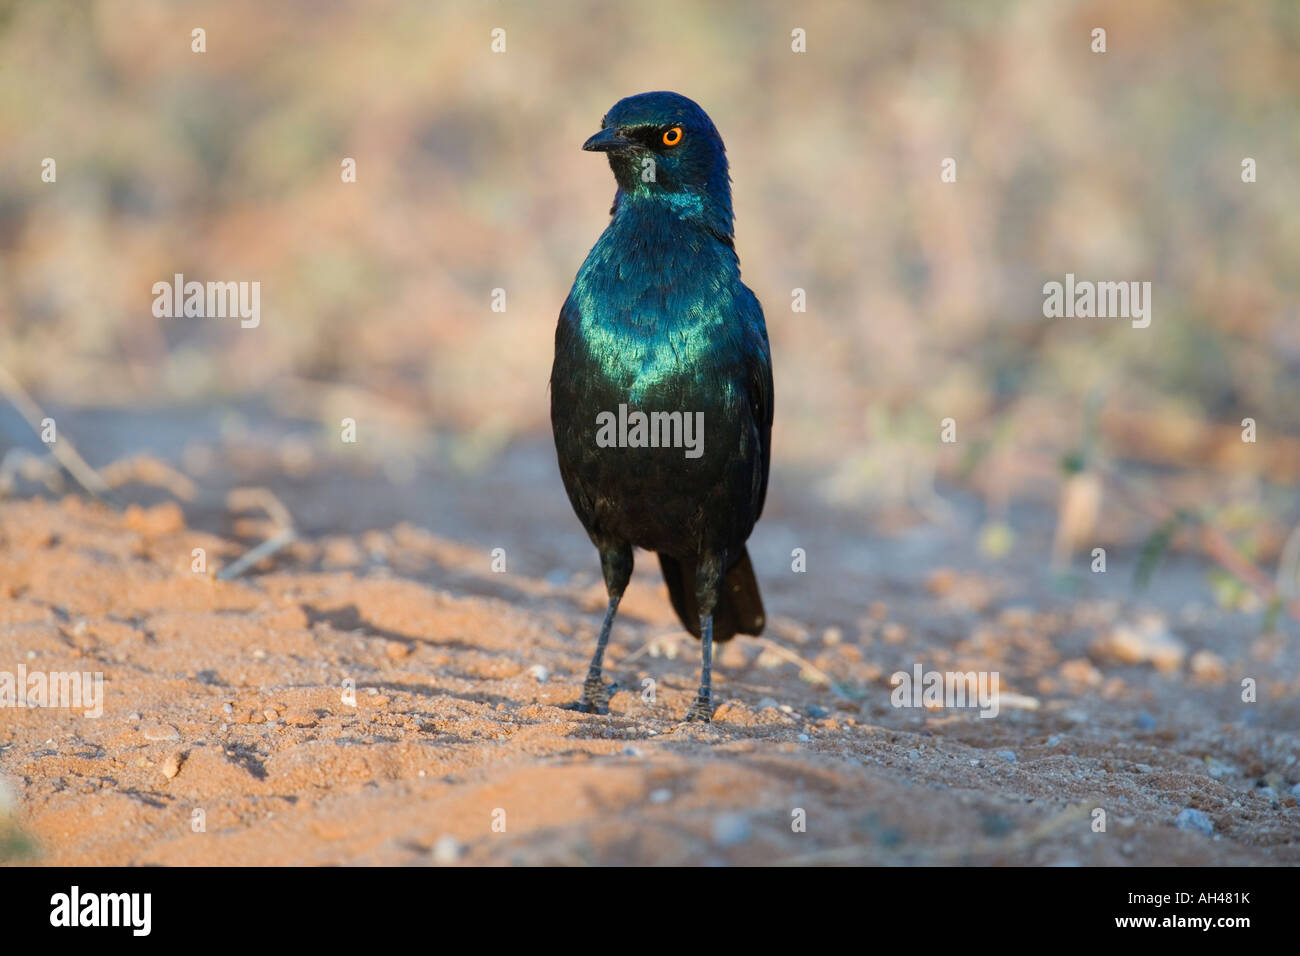 Cape glossy starling Lamprotornis nitens Kgalagadi Transfrontier Park South Africa Stock Photo